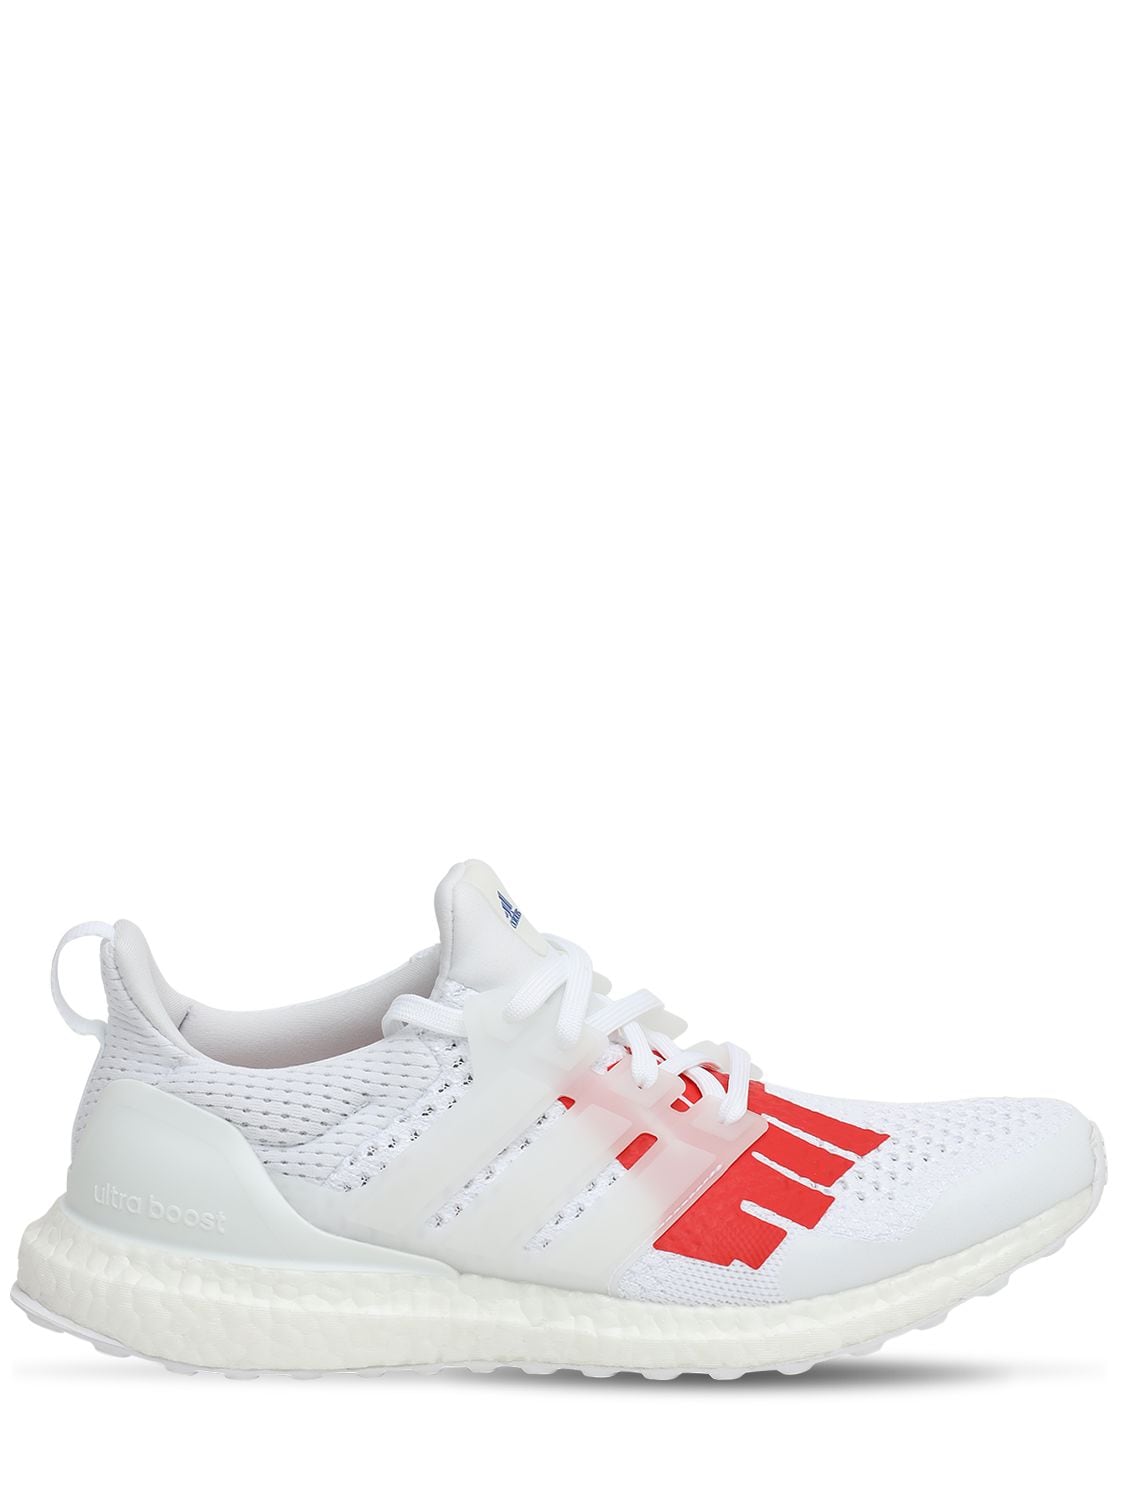 Adidas X Undefeated Ultraboost Undftd Sneakers In White